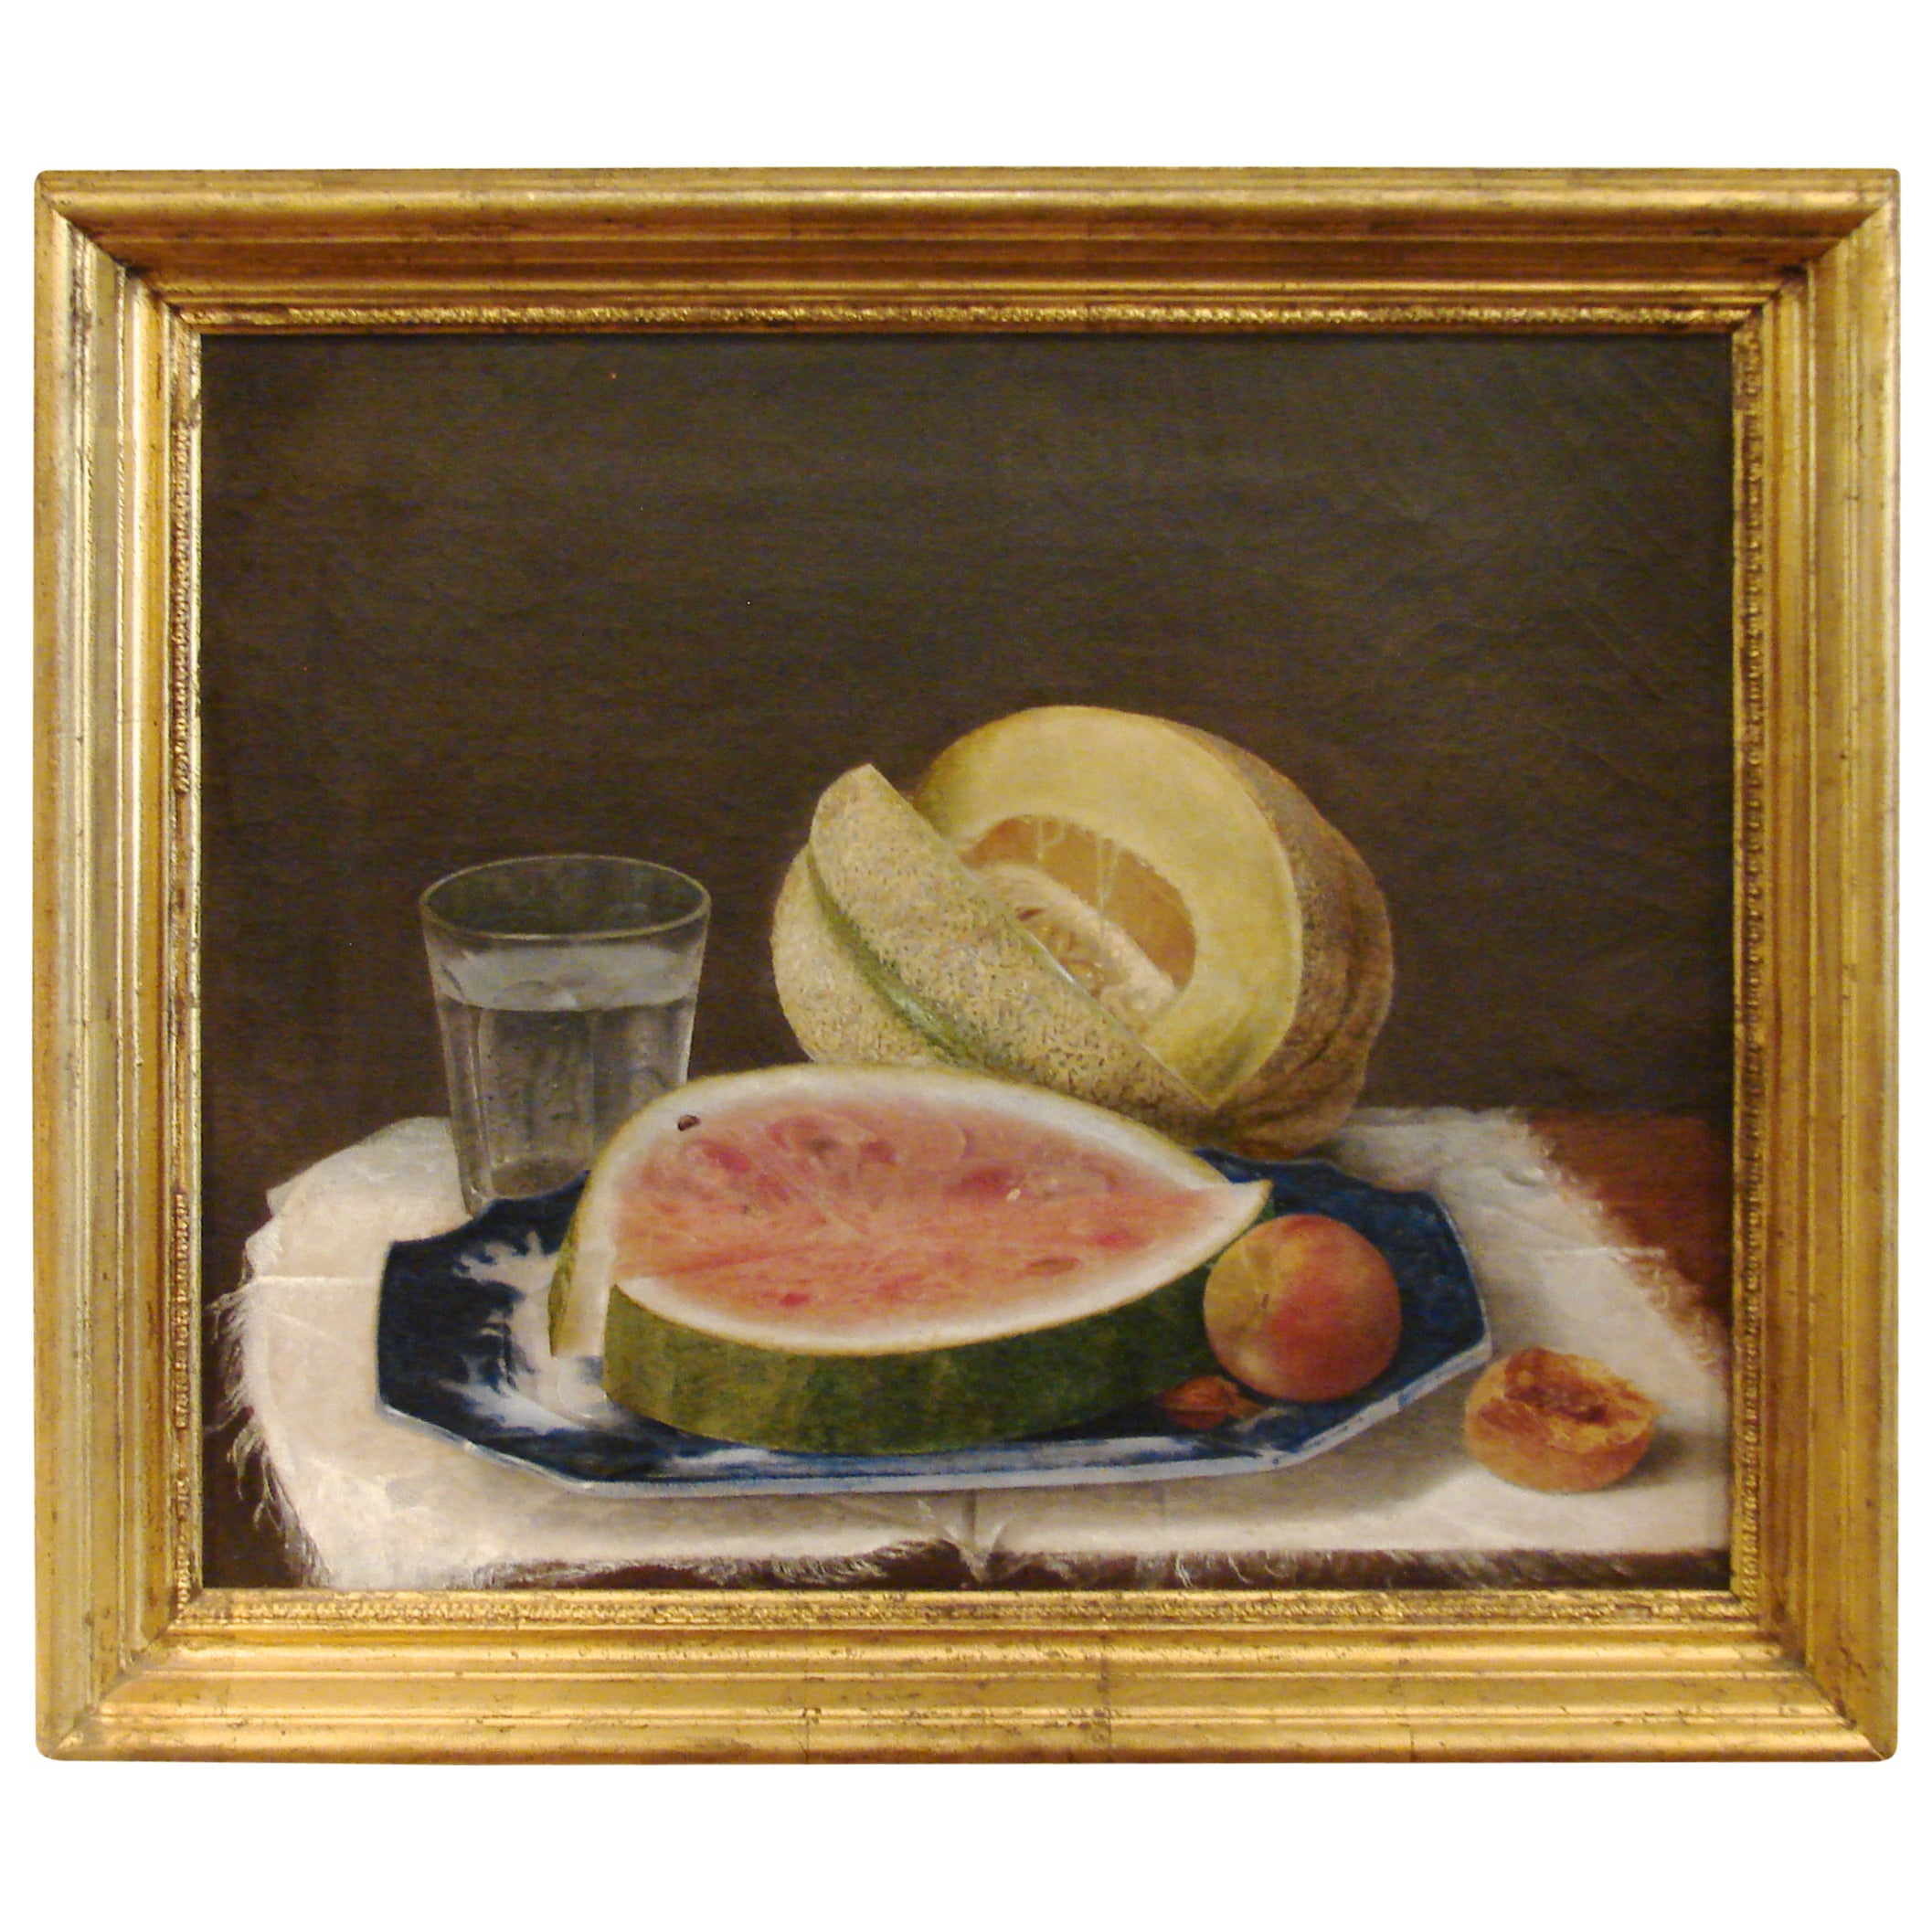 American Still Life Oil on Canvas with Watermelon, Cantelope and Peaches